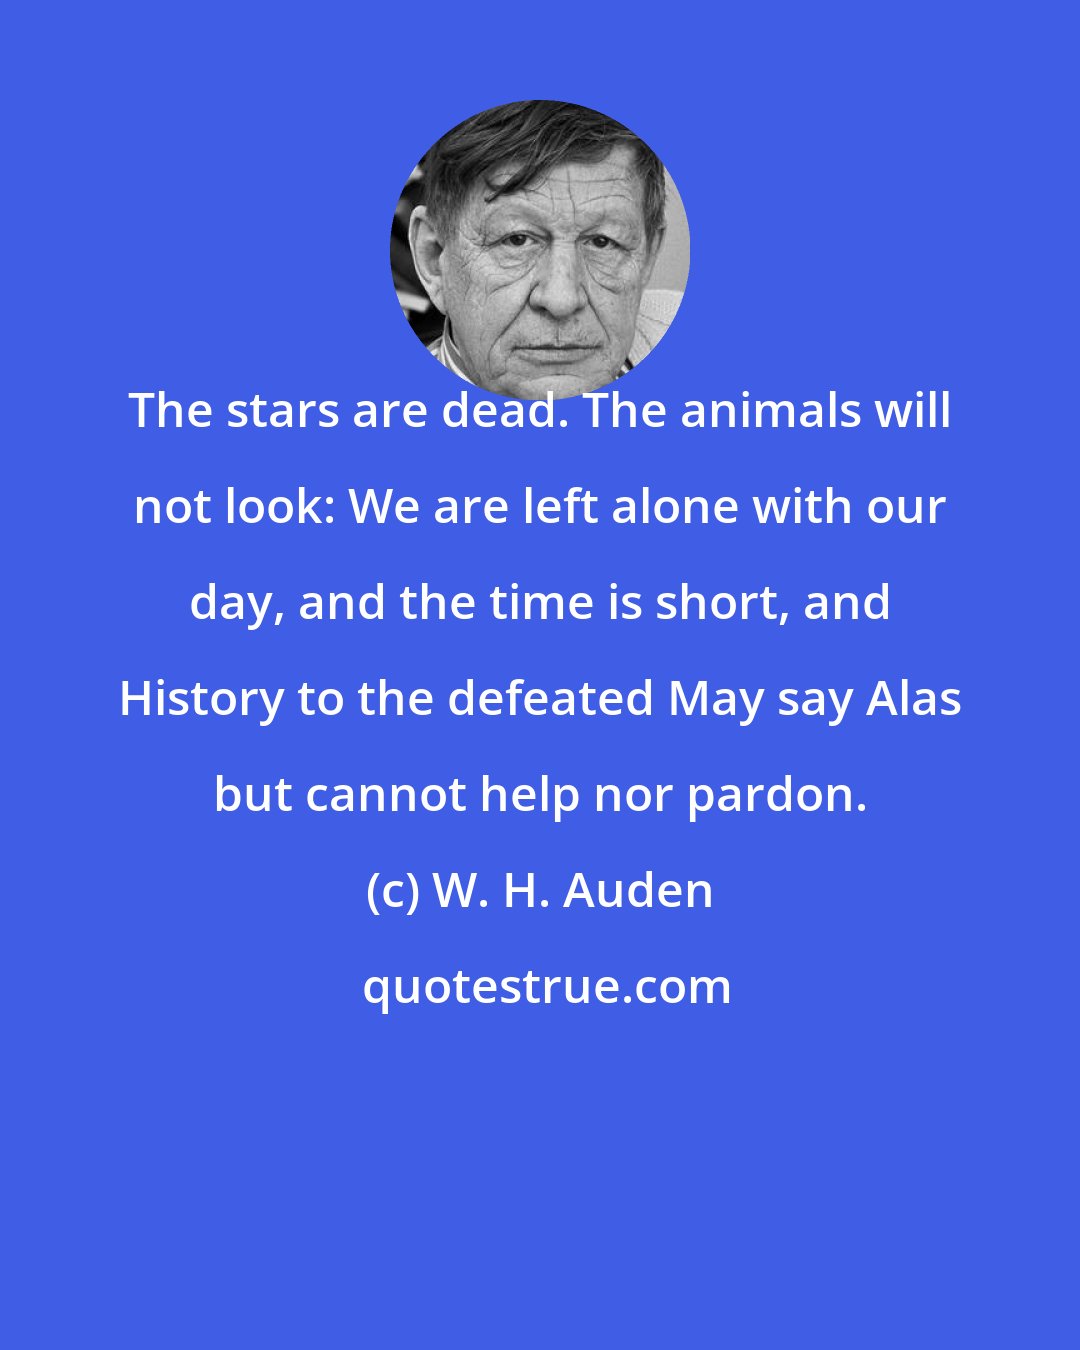 W. H. Auden: The stars are dead. The animals will not look: We are left alone with our day, and the time is short, and History to the defeated May say Alas but cannot help nor pardon.